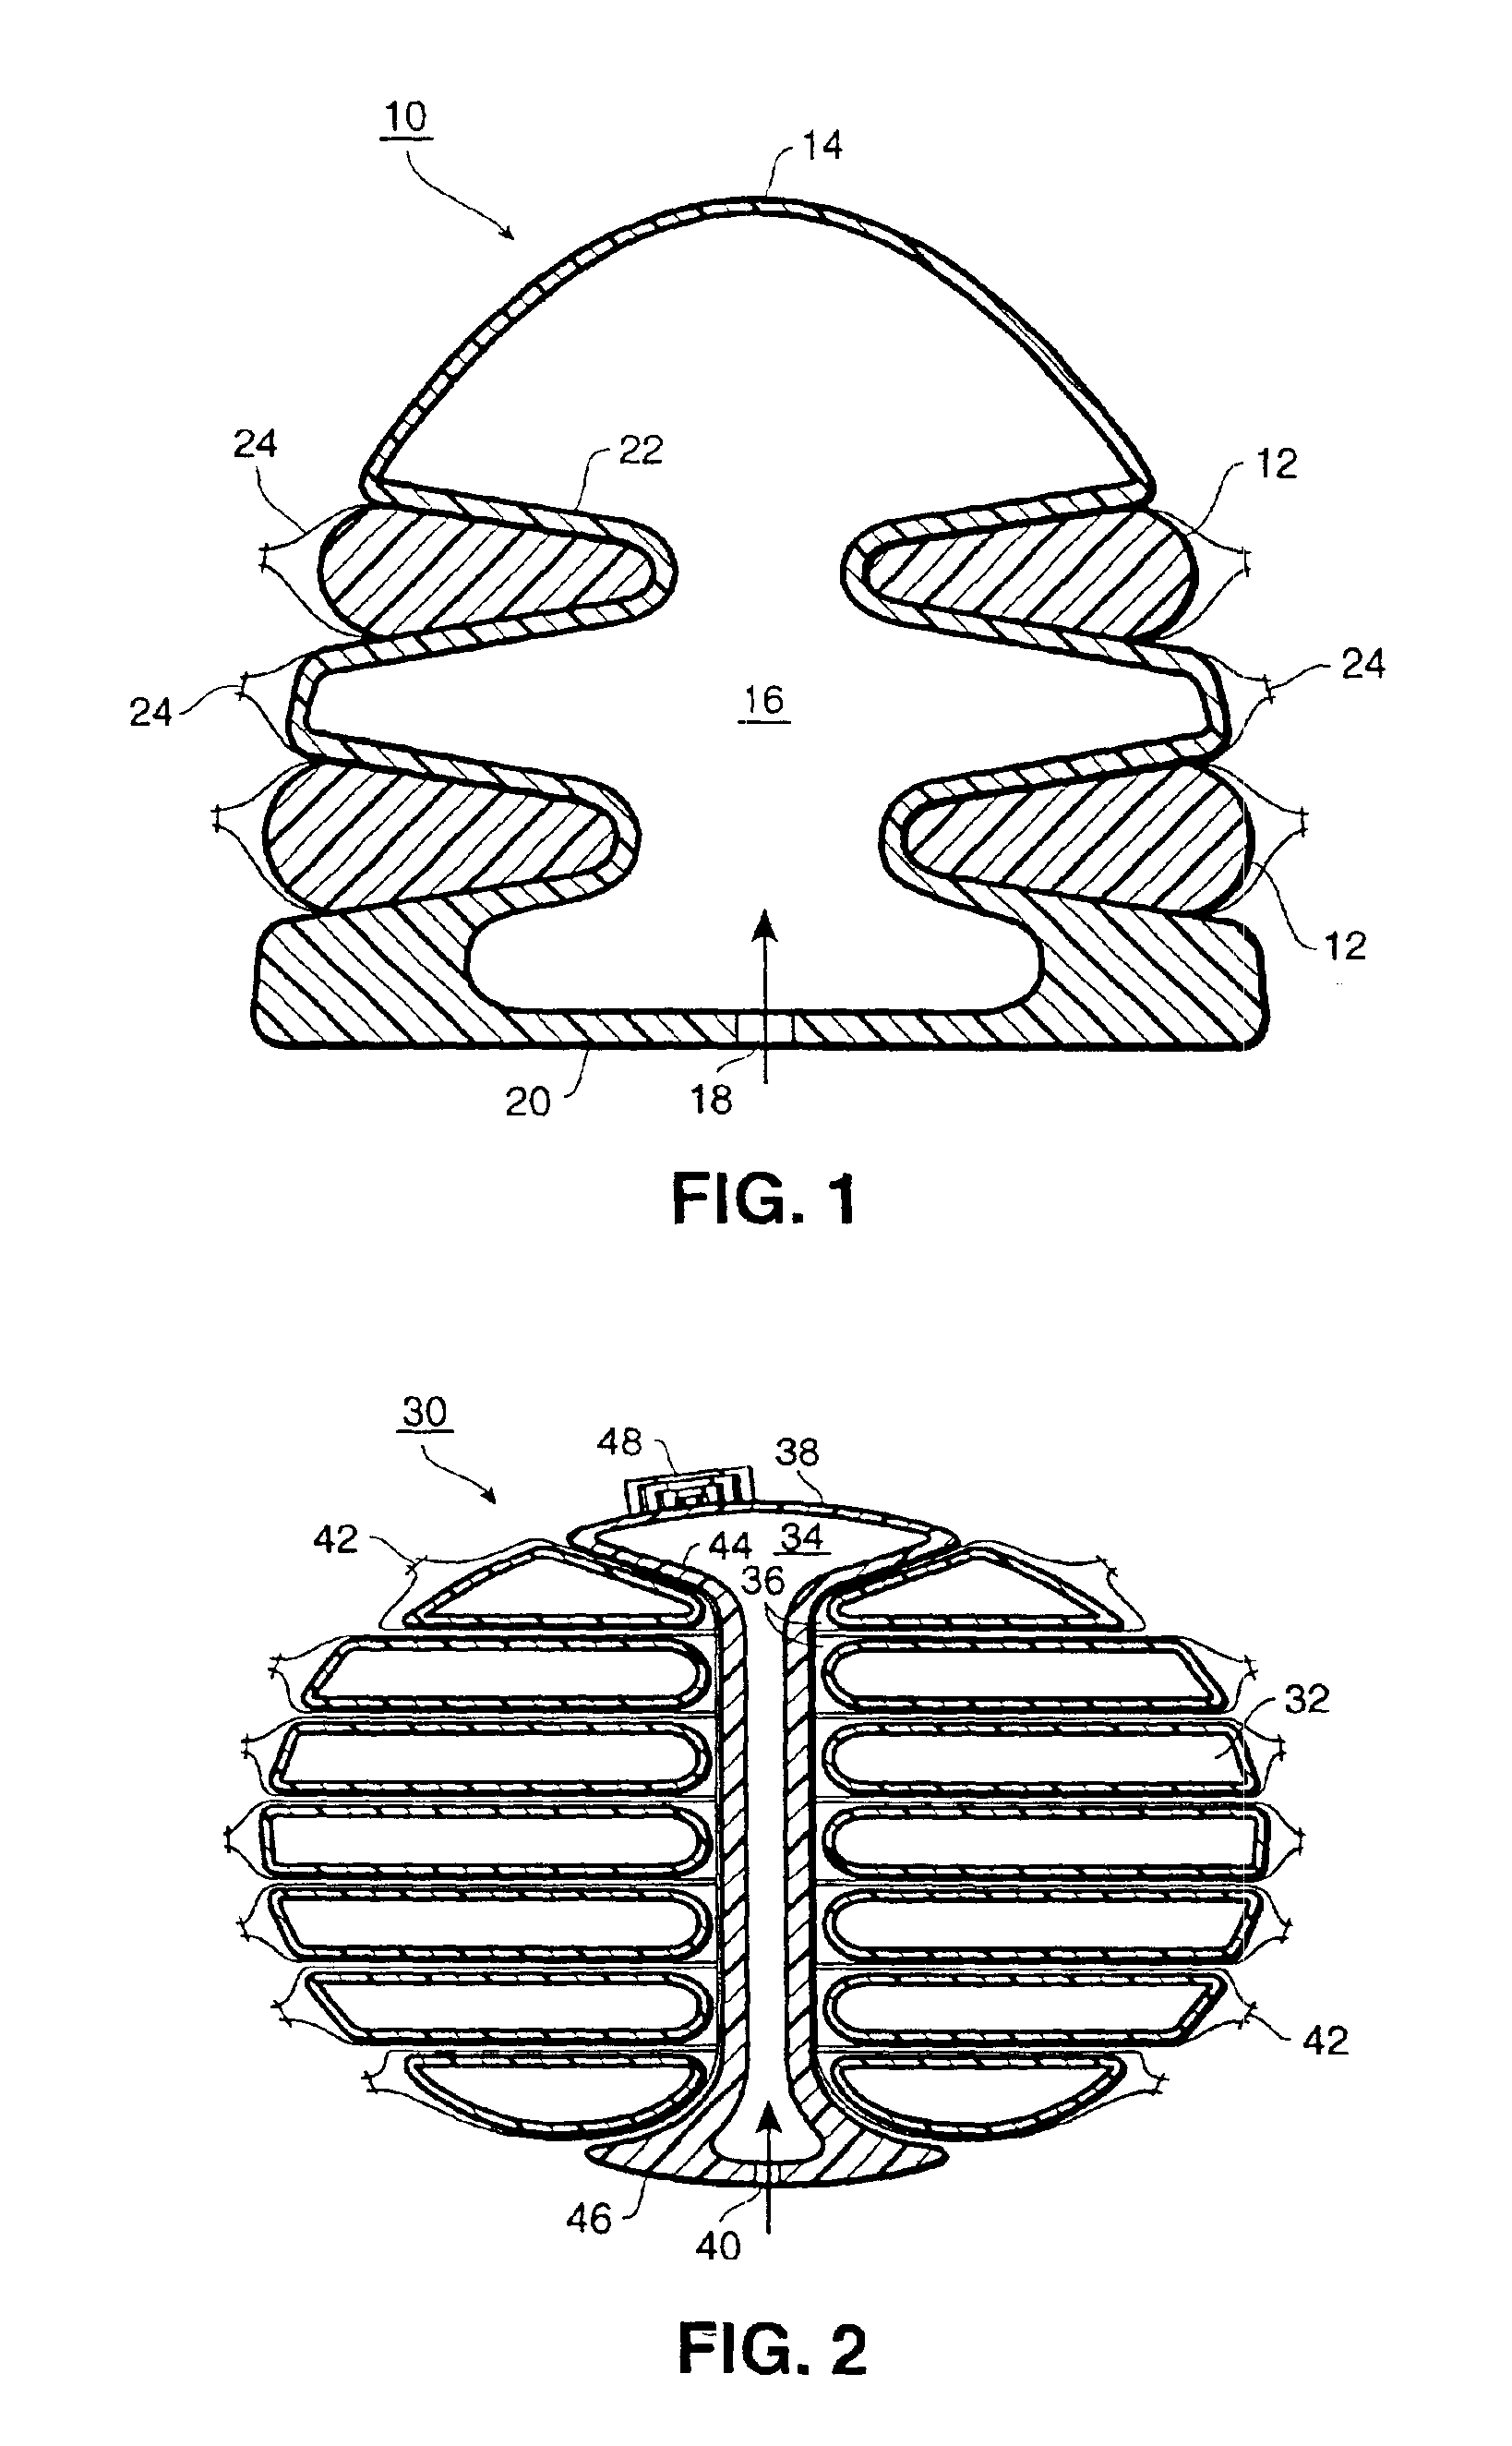 Dual-sided, texturized biocompatible structure